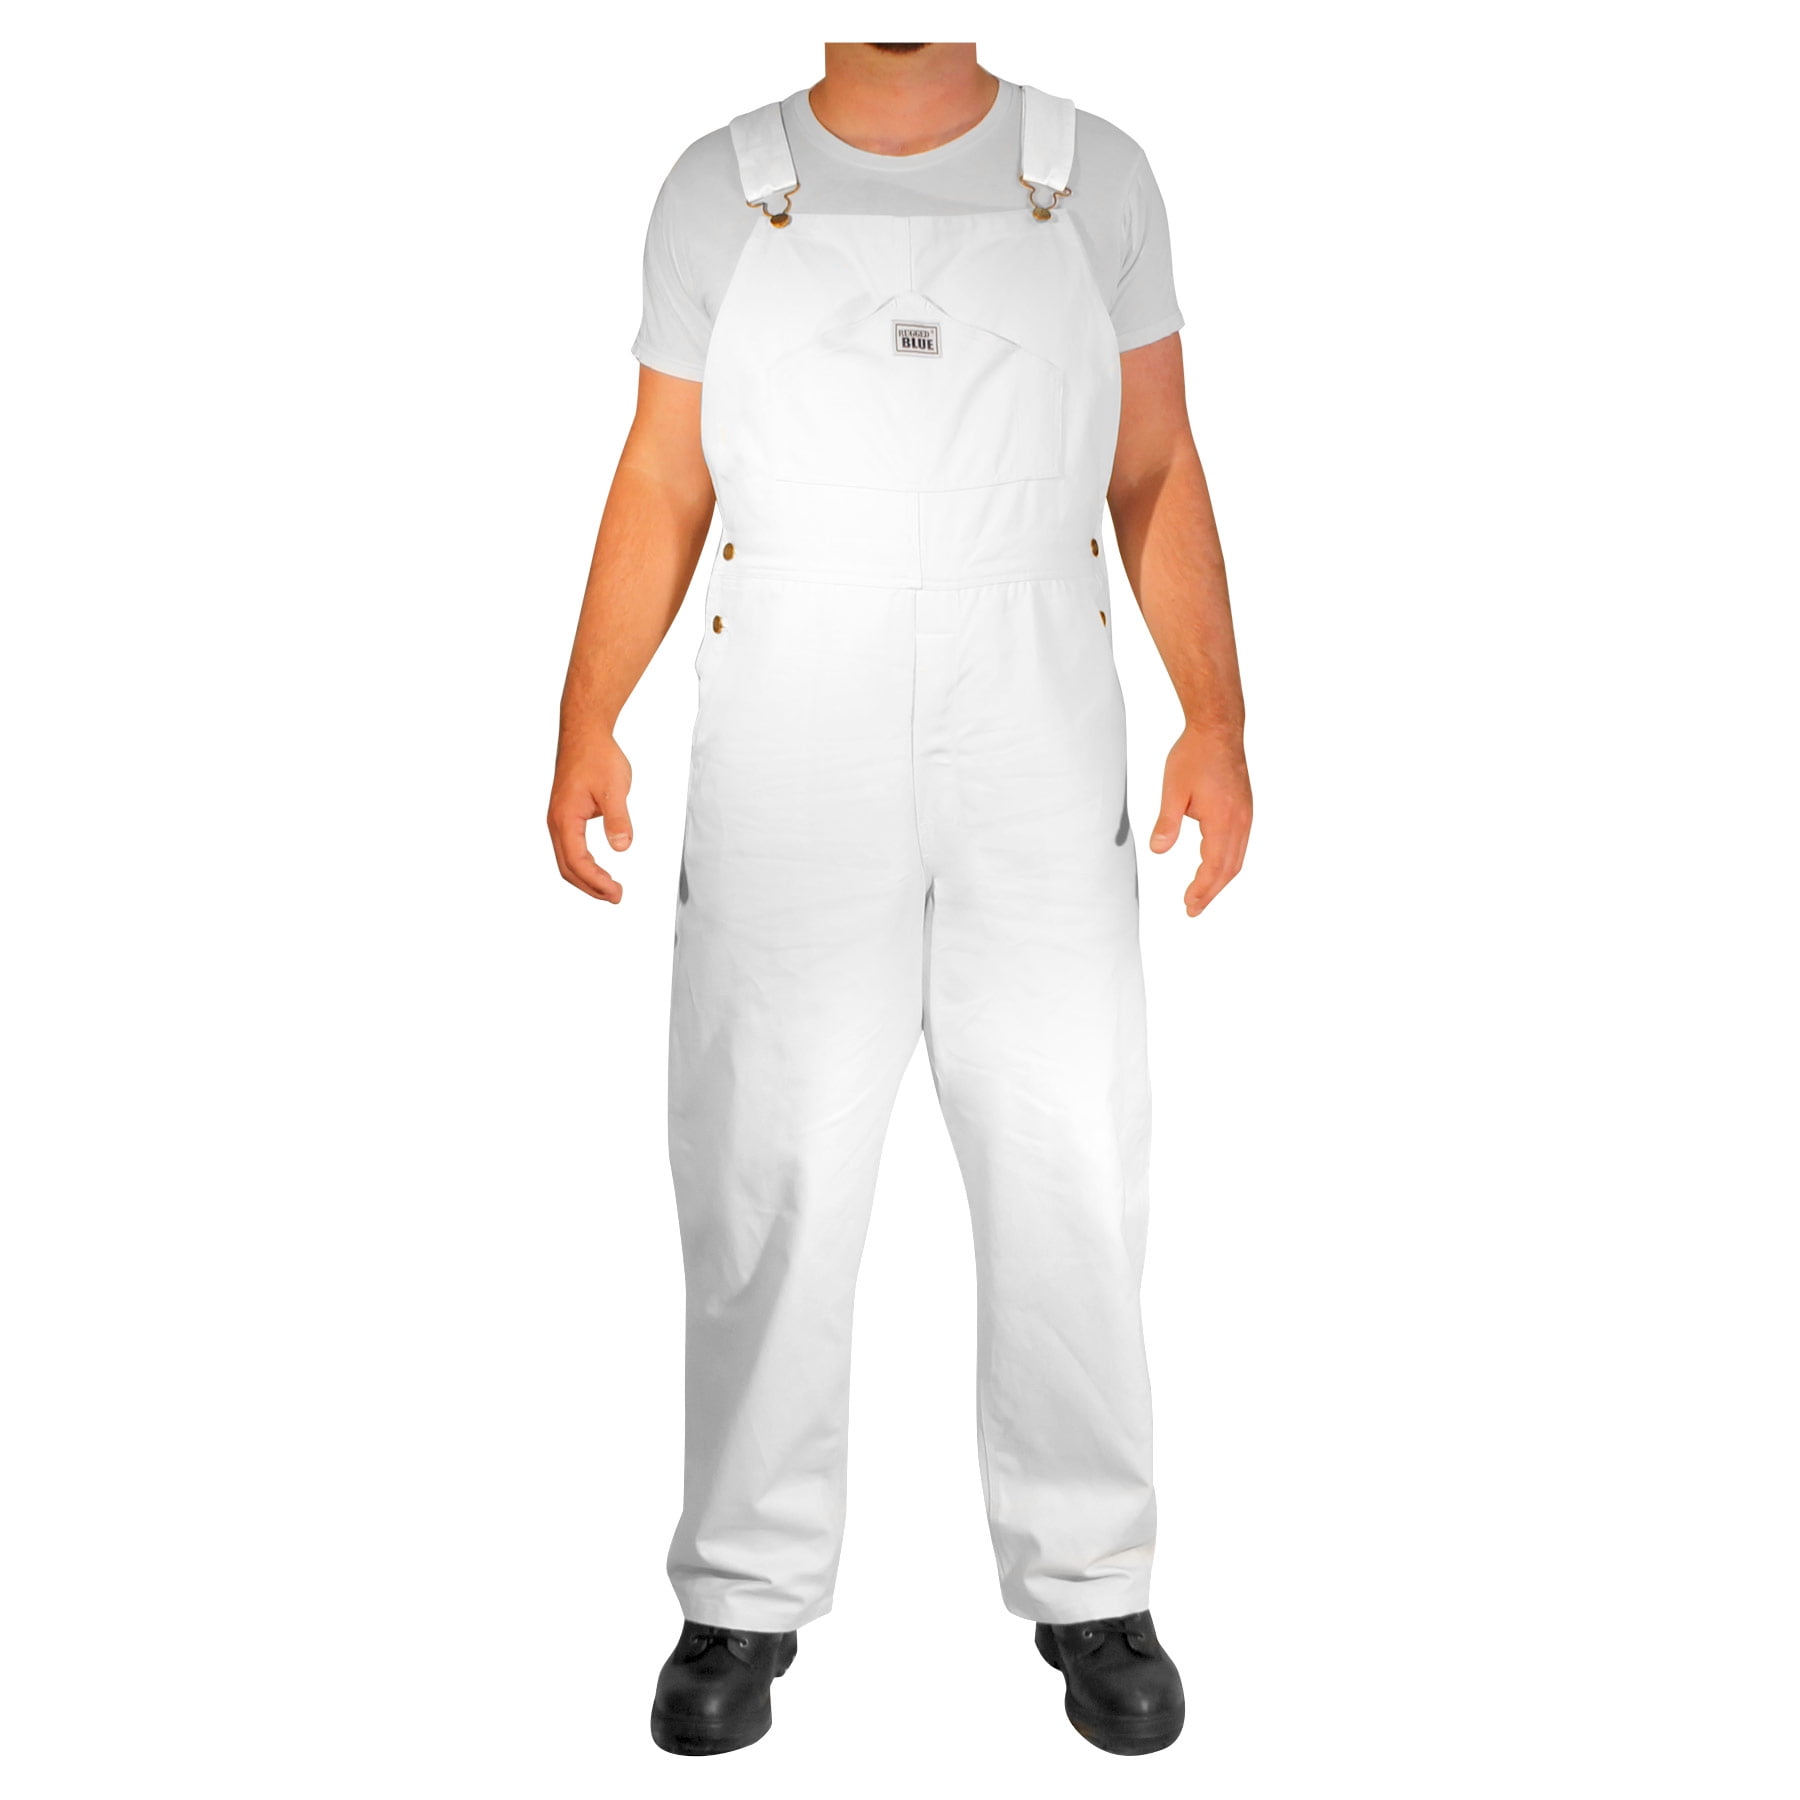 Black White Red and Navy Colours Blue Road Master Bib and Brace Dungaree Overalls Painters Suit For Decorators Builders